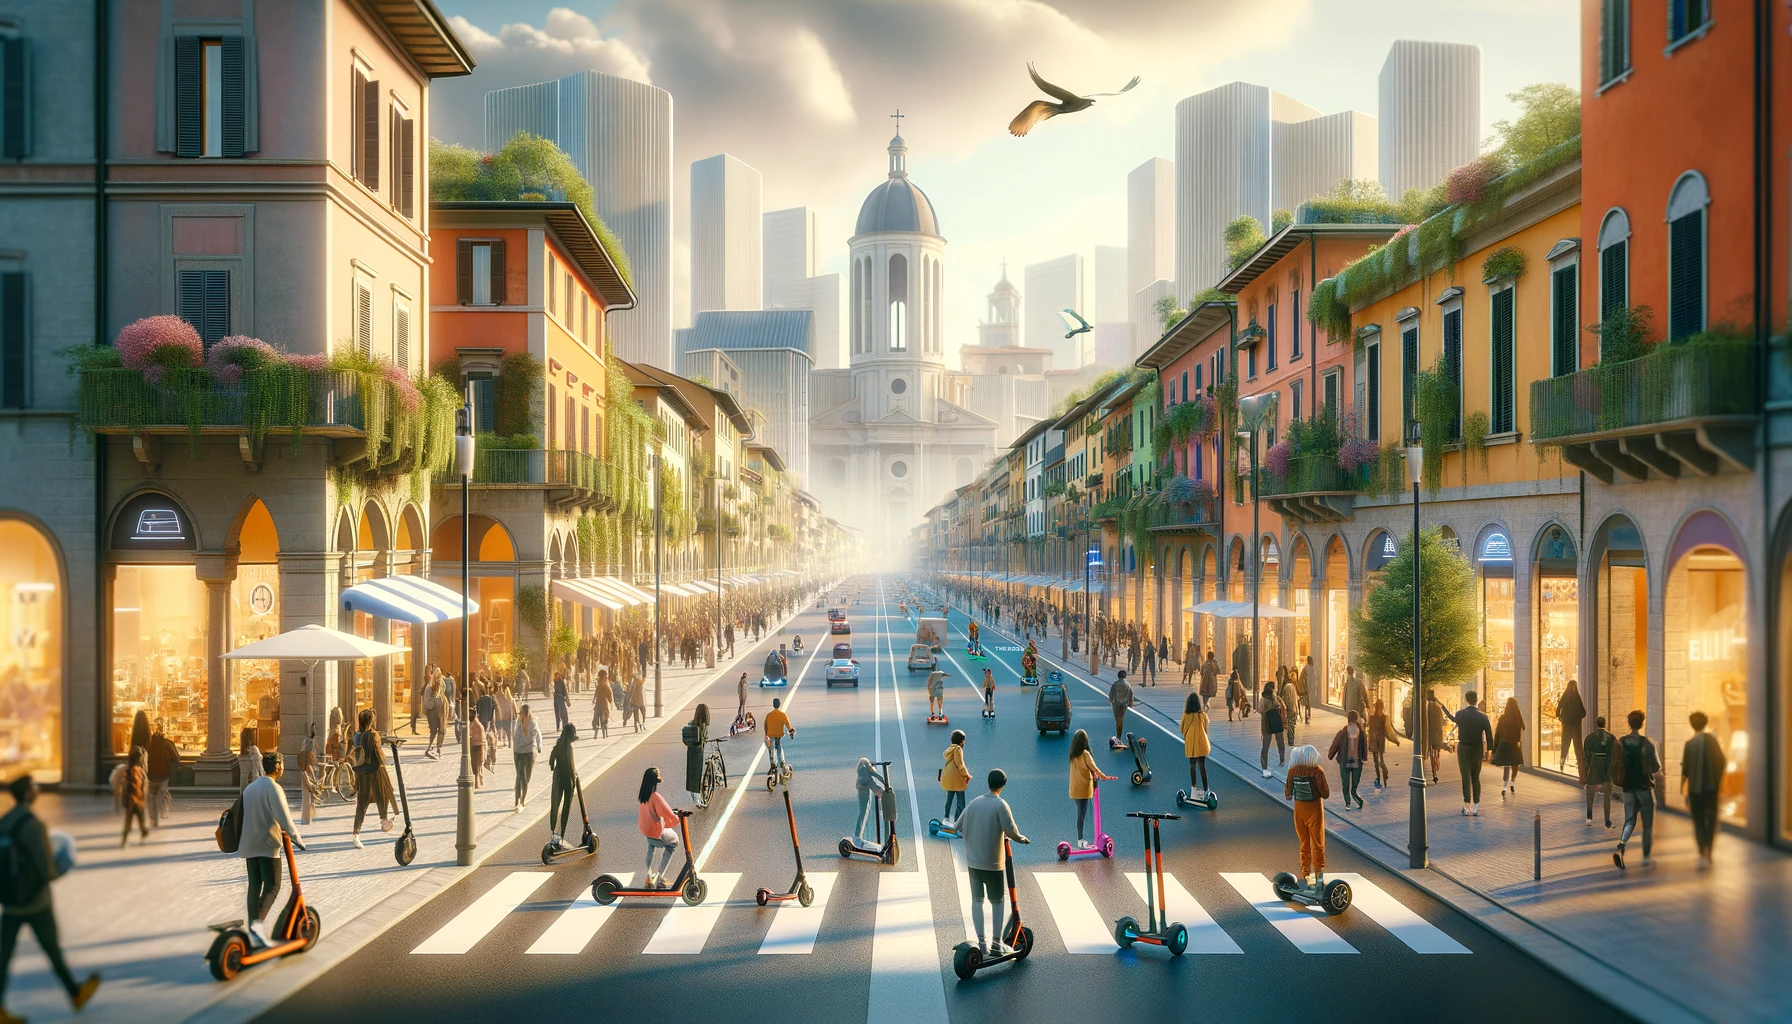 DALL·E 2023-11-30 17.20.20 – Urban landscape in Italy showcasing the rise of electric micromobility in 2023. The image should depict a vibrant Italian city street filled with peop